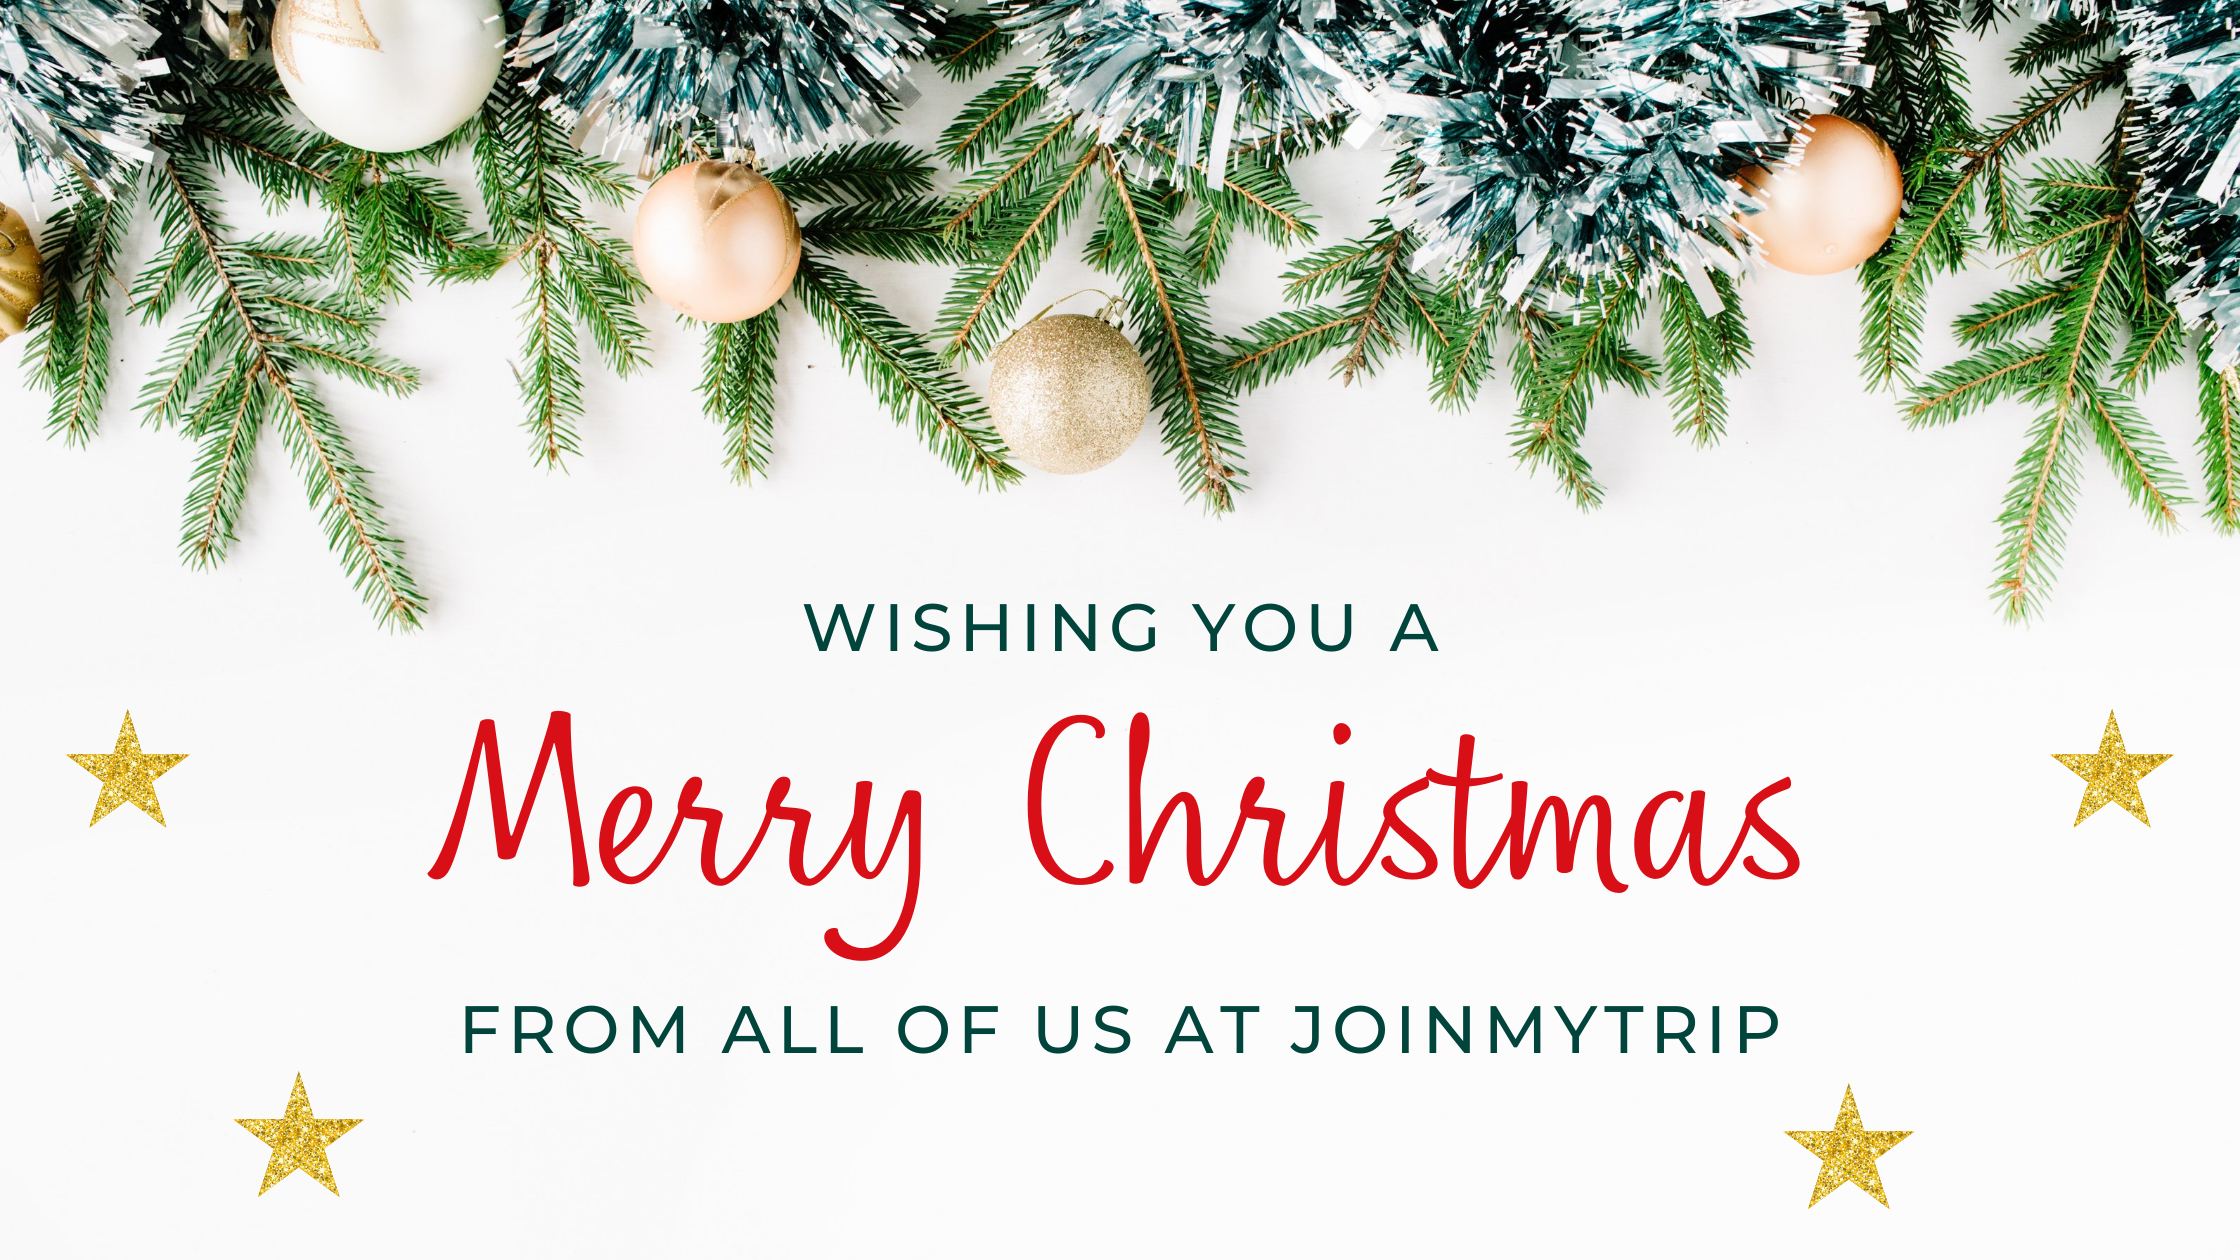 Happy Christmas from JoinMyTrip